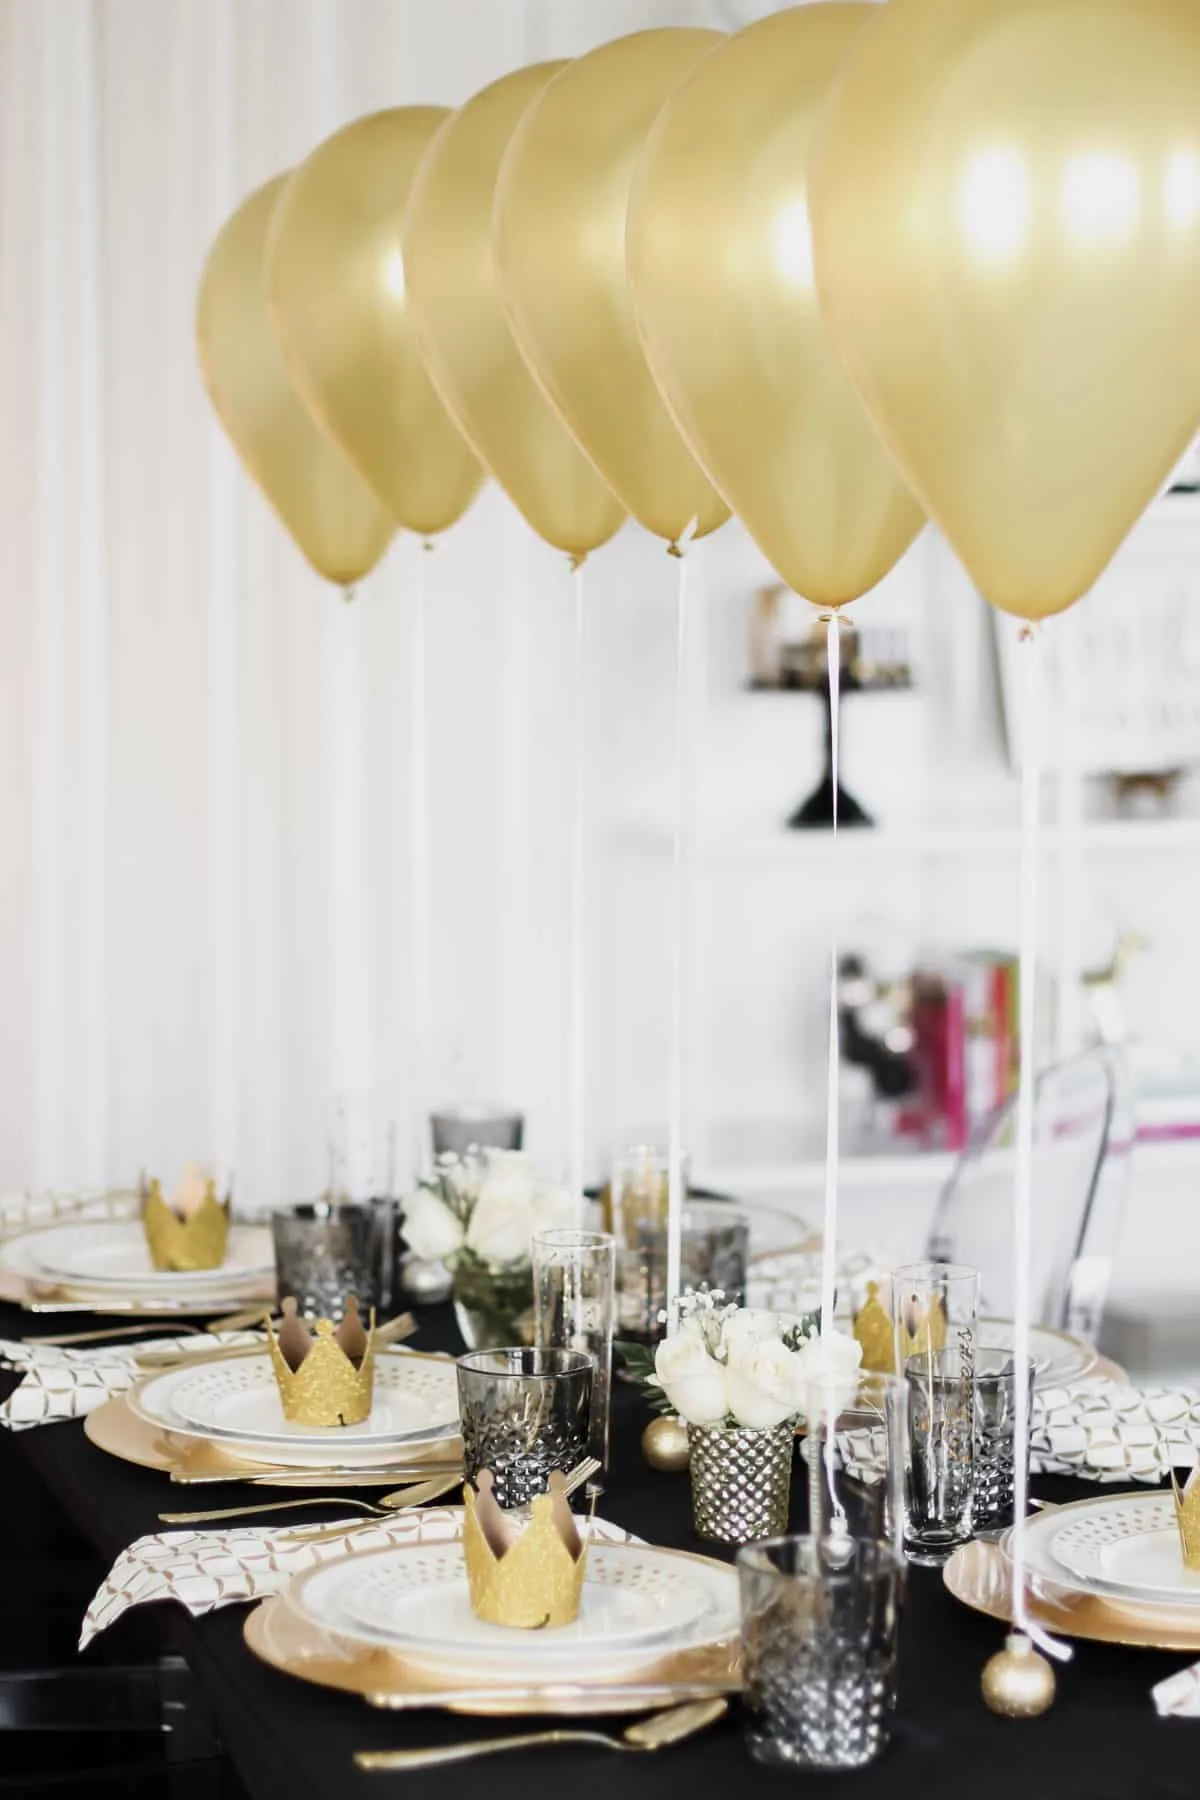 Tablescape with Balloons Centerpiece